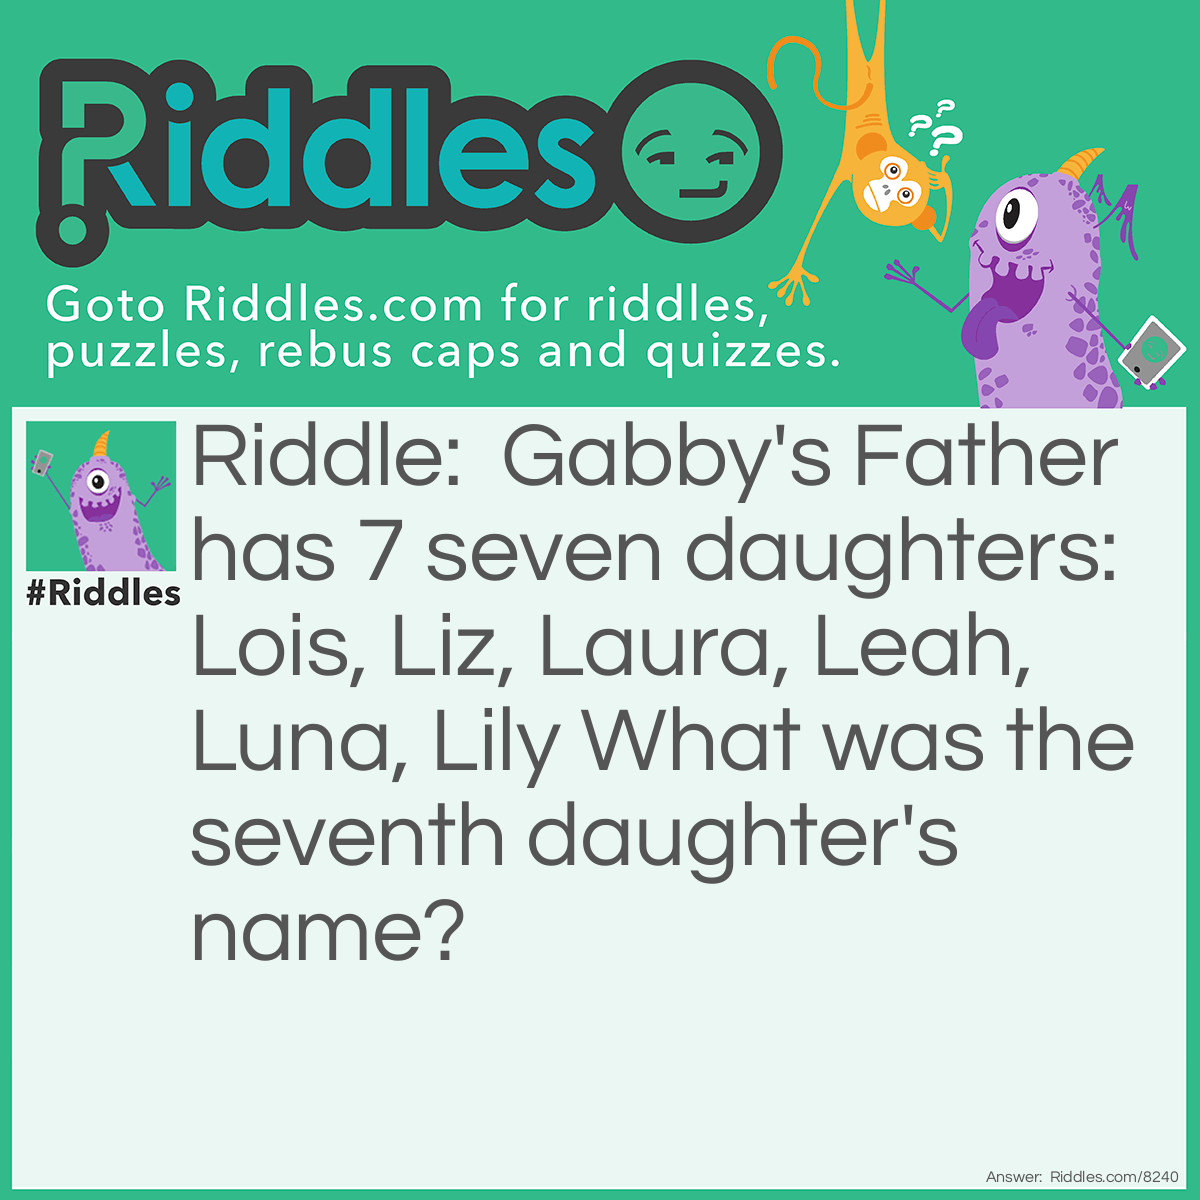 Riddle: Gabby's Father has 7 seven daughters: Lois, Liz, Laura, Leah, Luna, Lily What was the seventh daughter's name? Answer: Gabby.